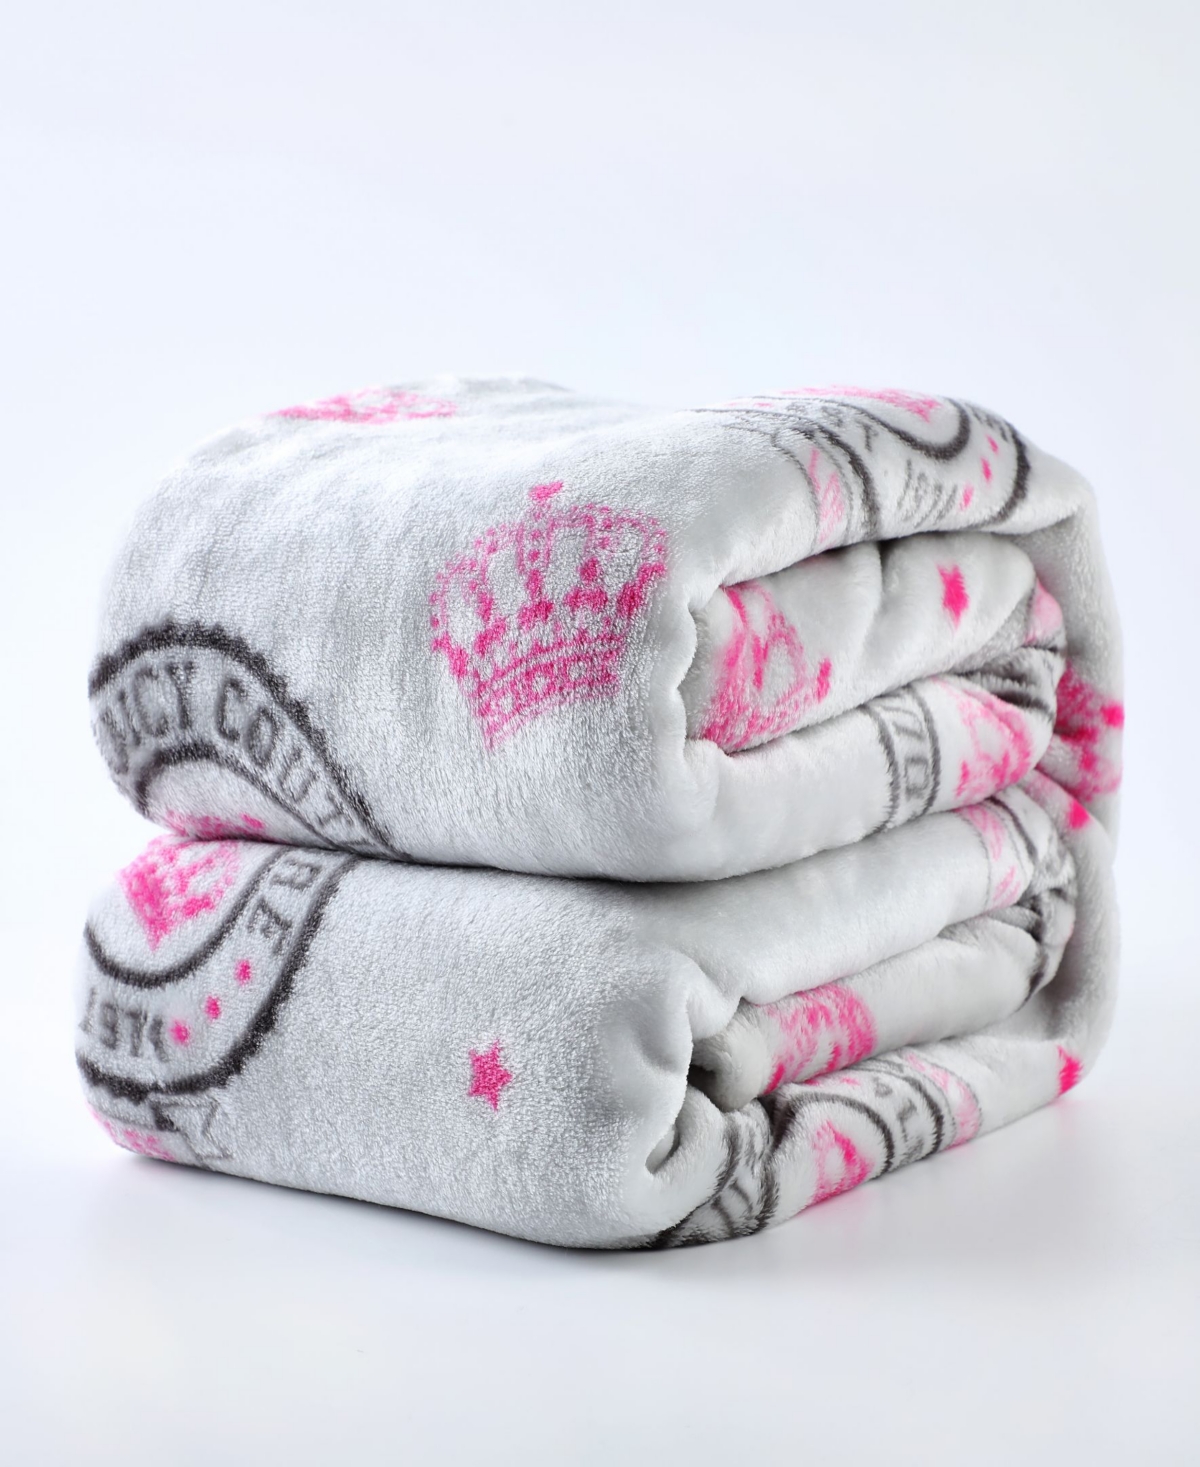 Juicy Couture Plush Throw, 50" X 70" In Emblem